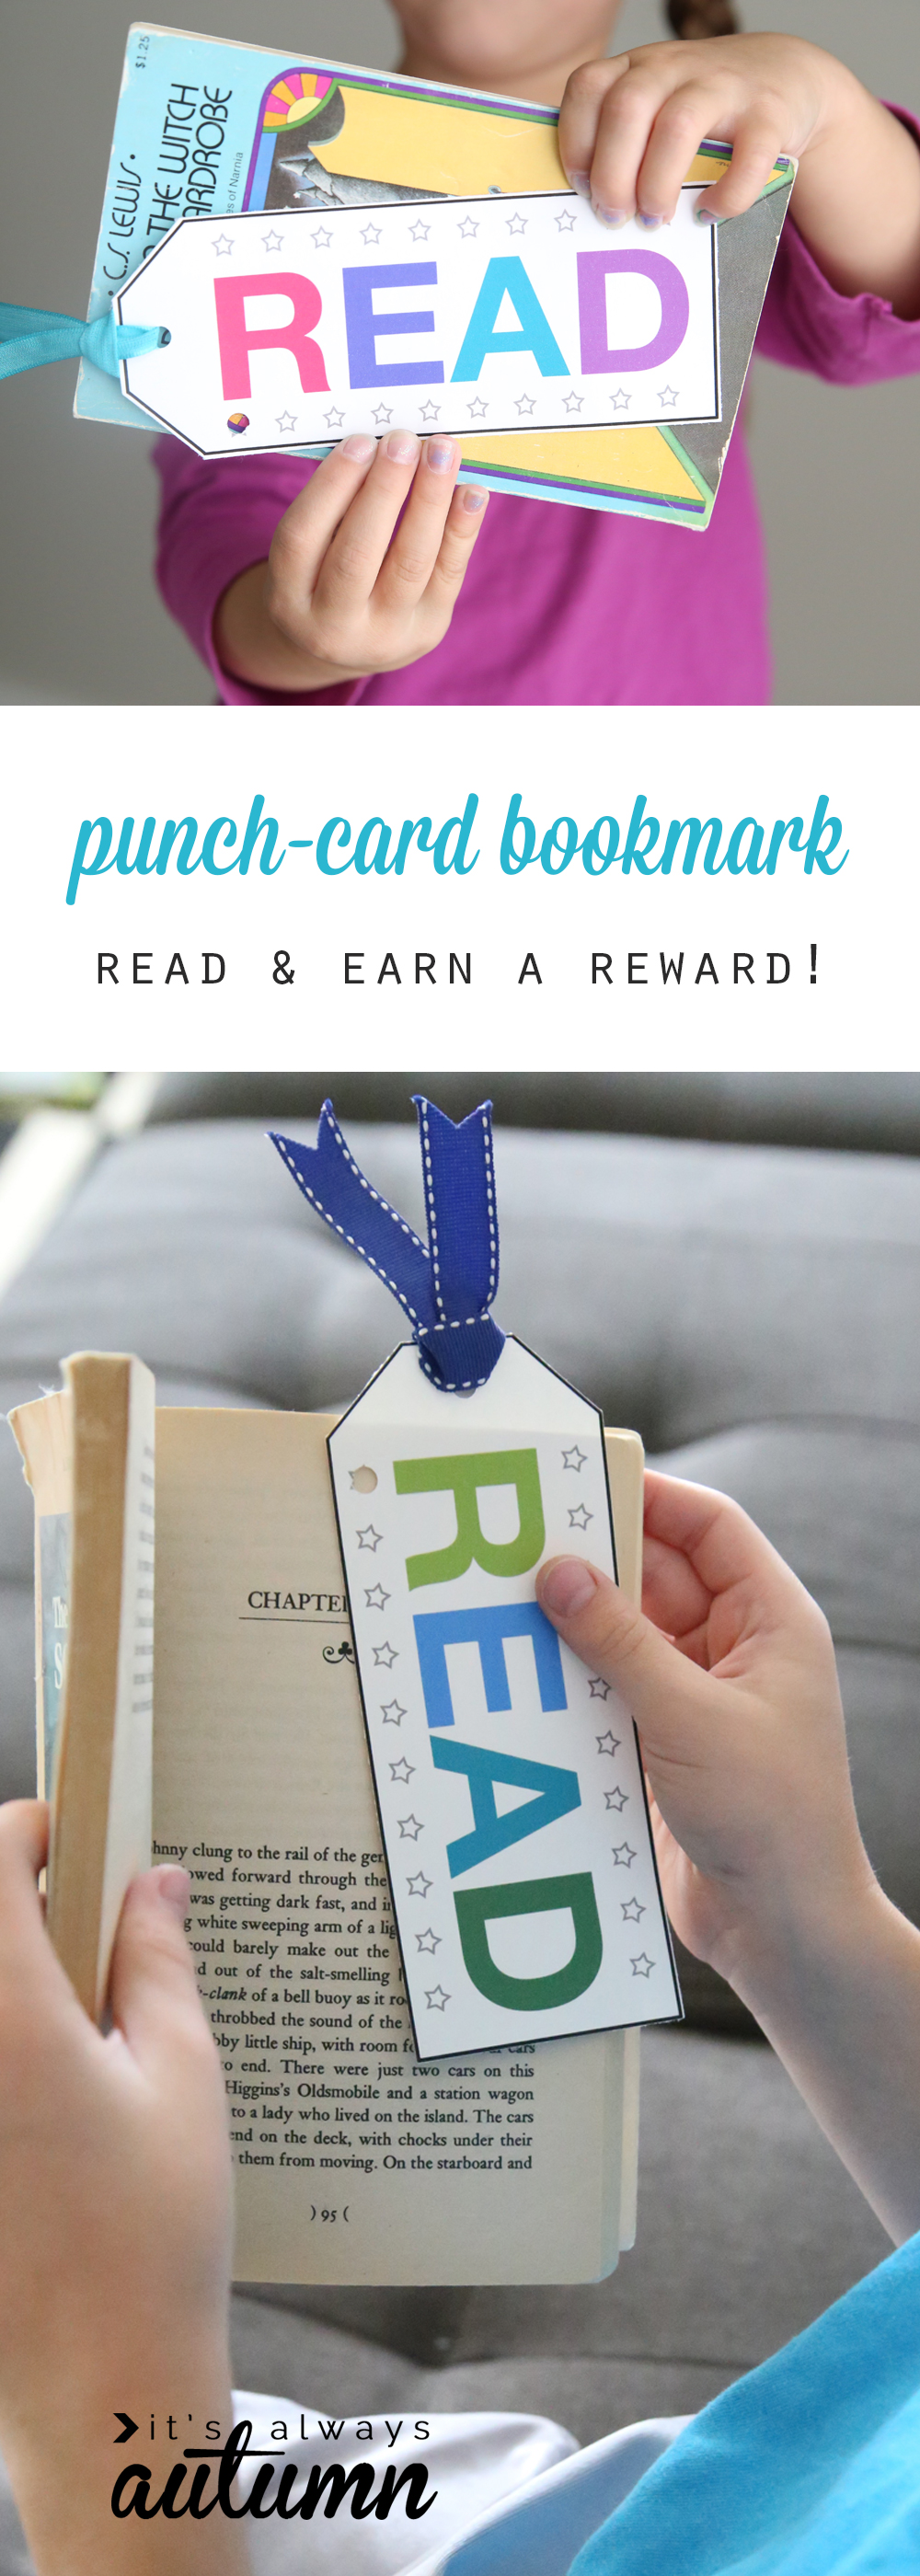 Kids holding books with punch card bookmarks